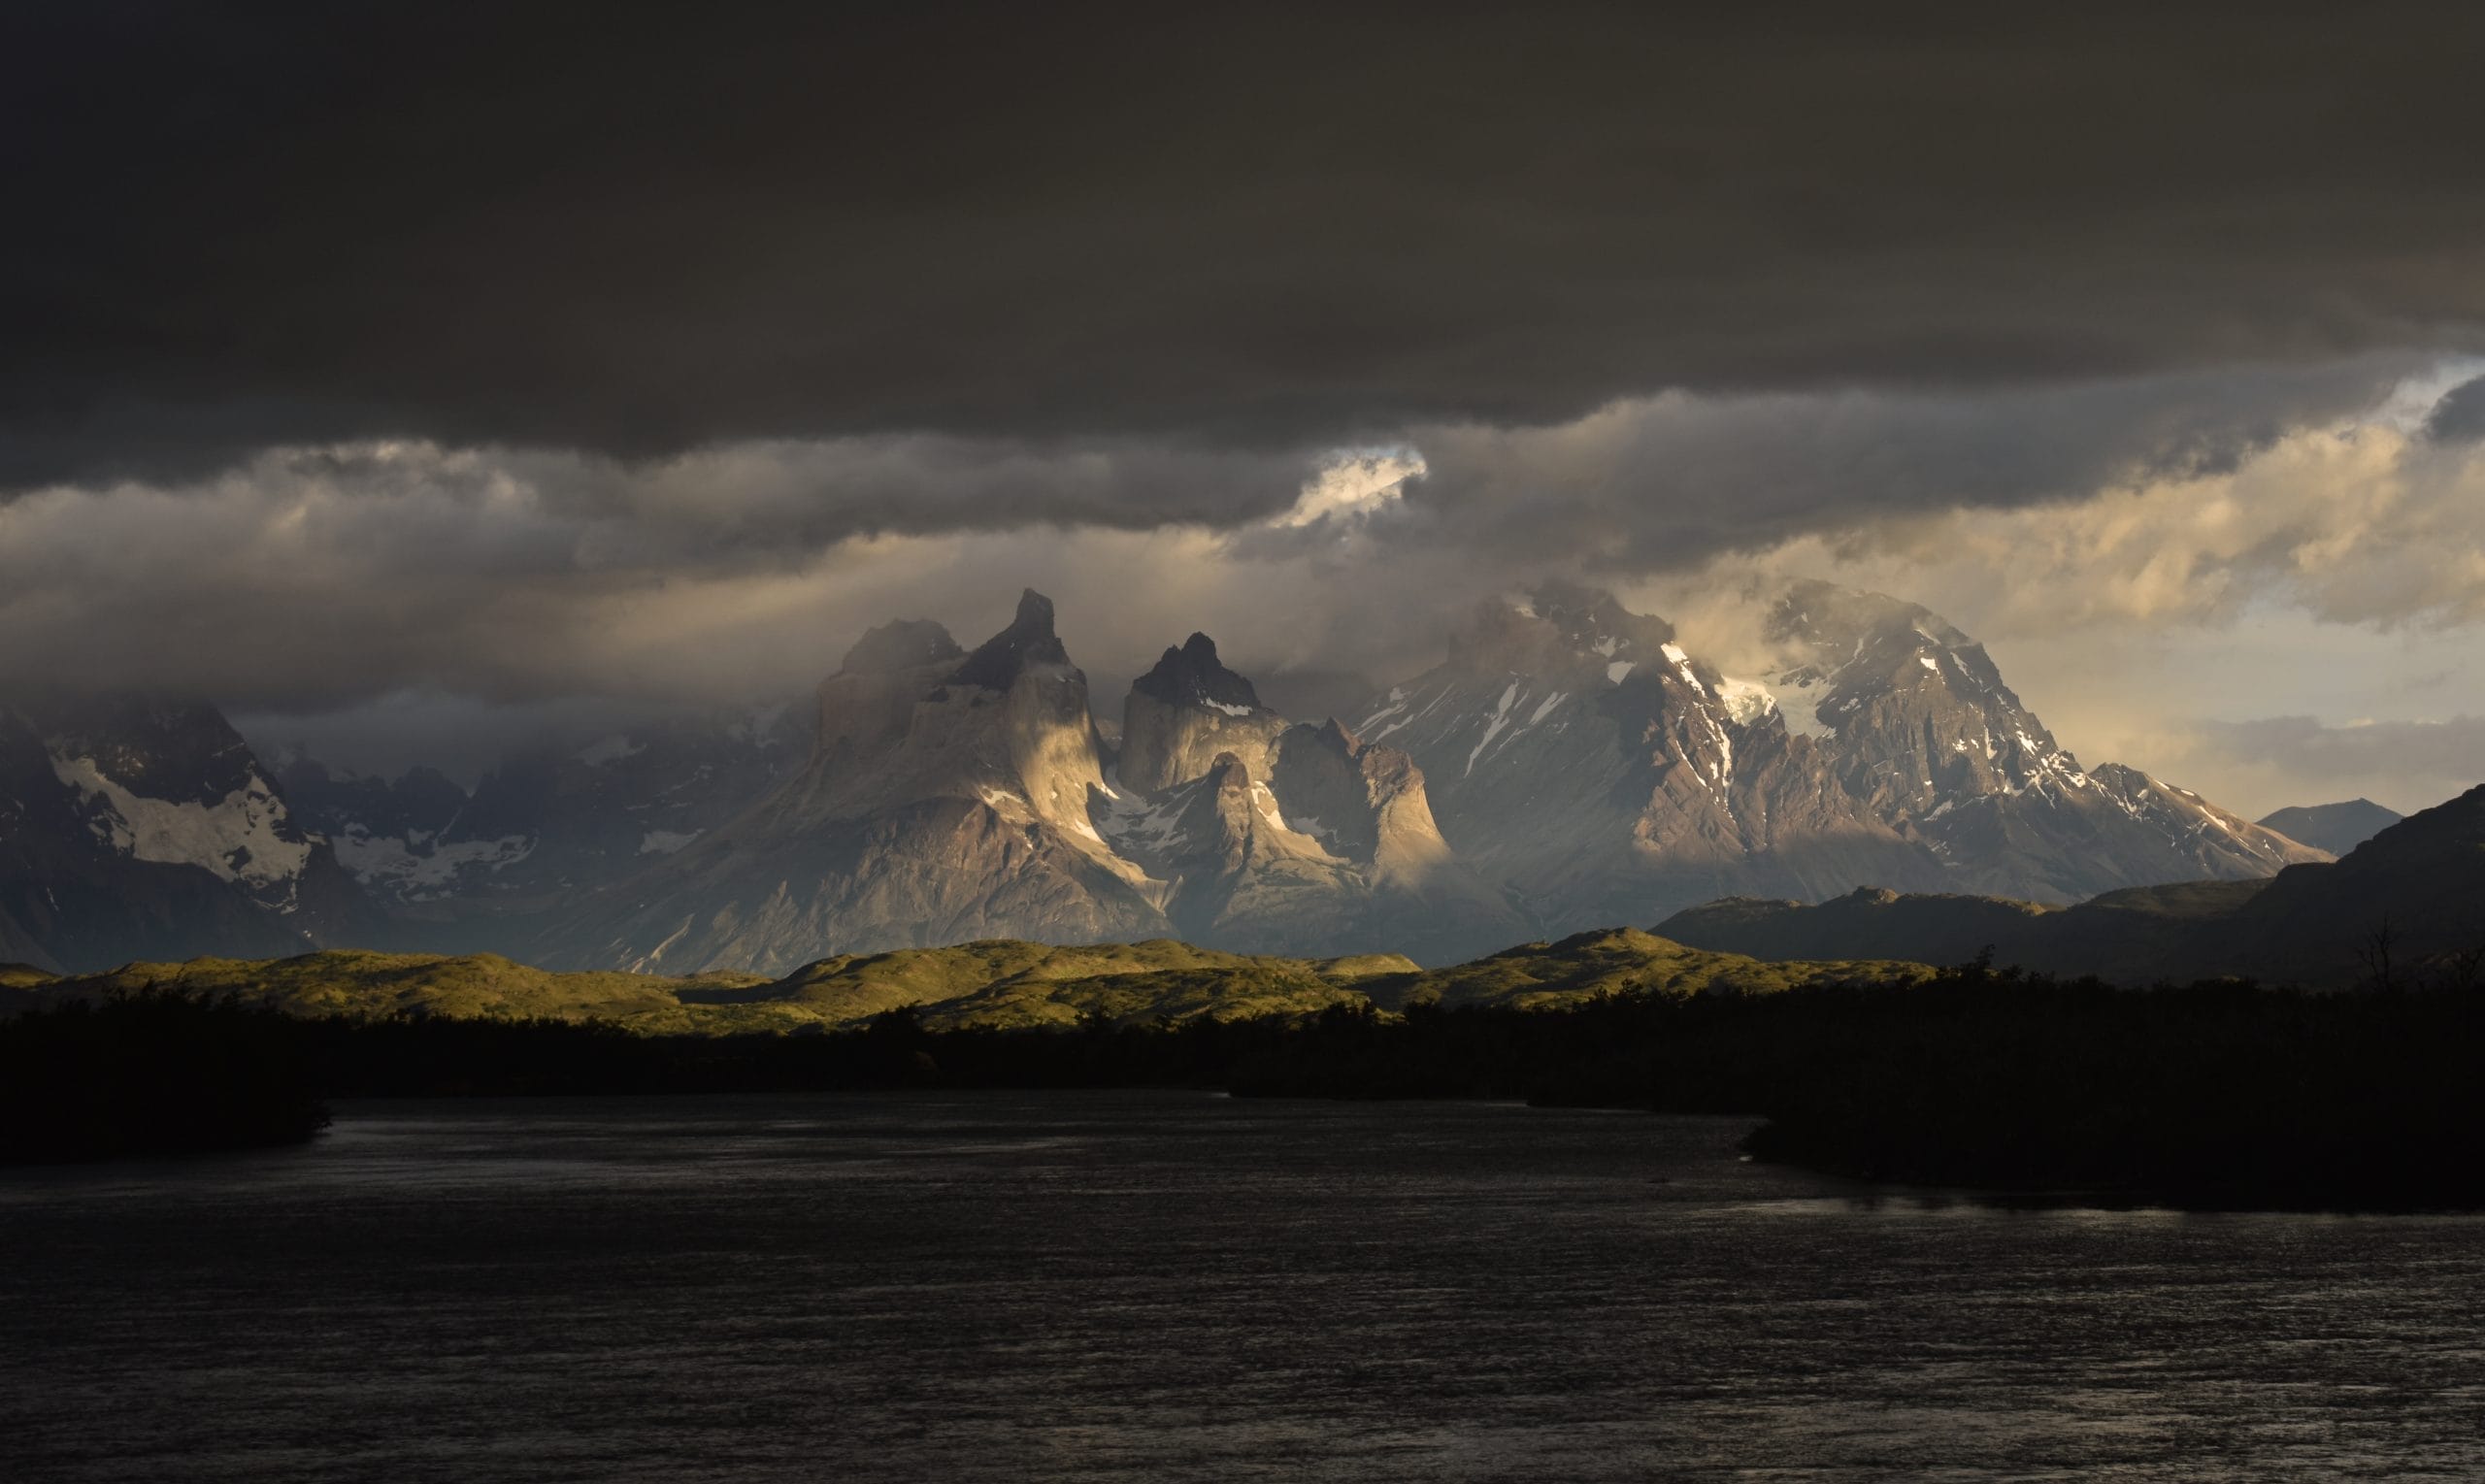 a photo of the mountains Torres del Paine in Chile, Patagonia with clouds sorrounding the snowy peaks